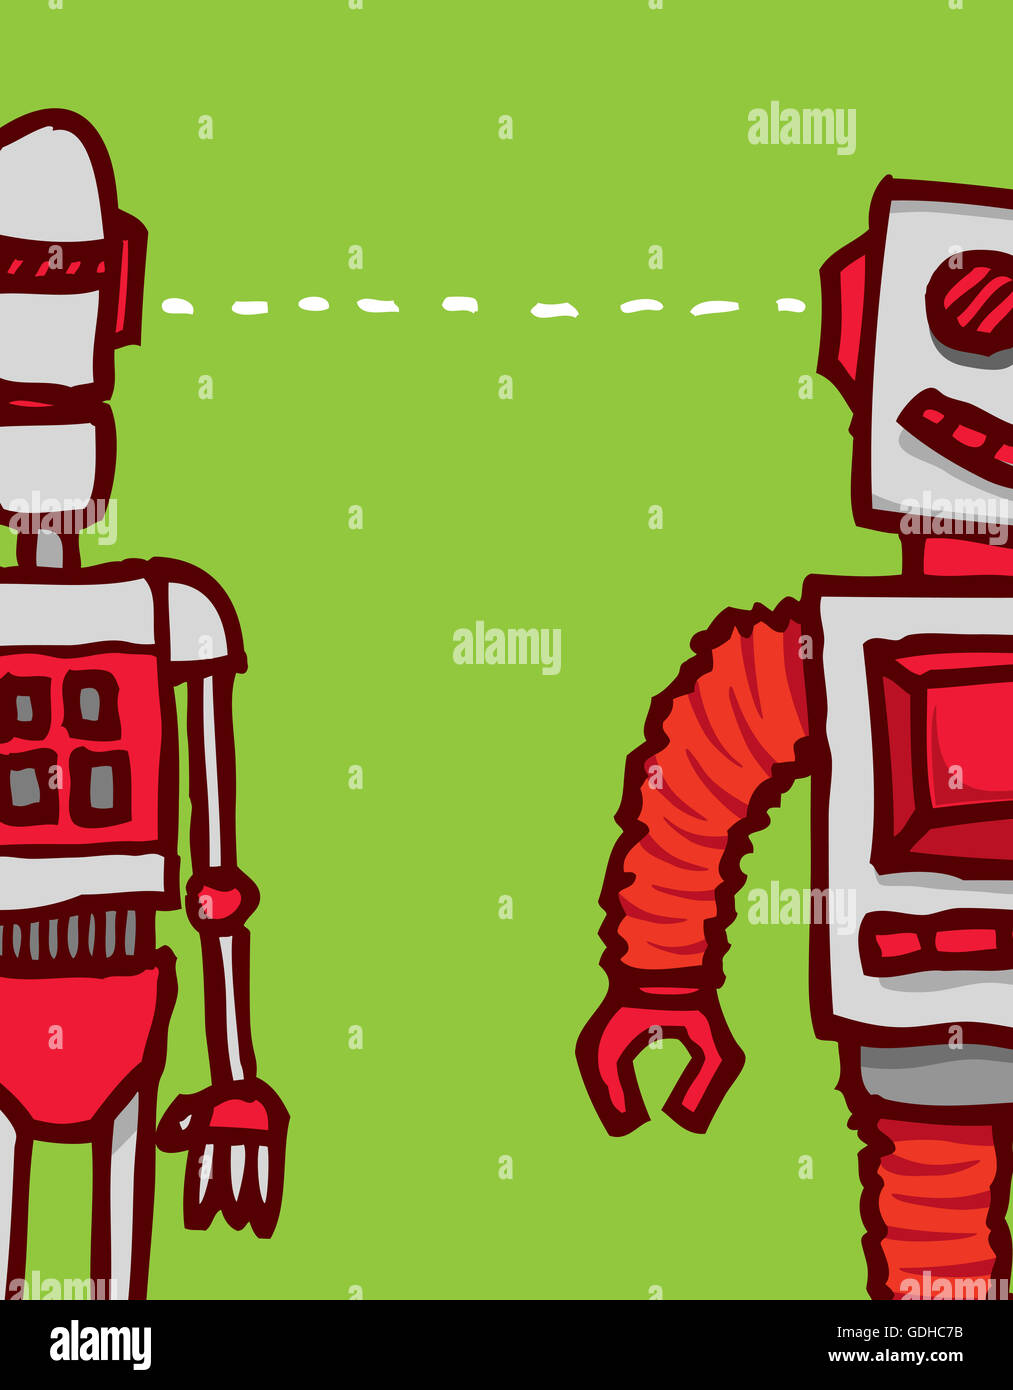 Cartoon illustration of two different robots communication sharing information or connecting Stock Photo